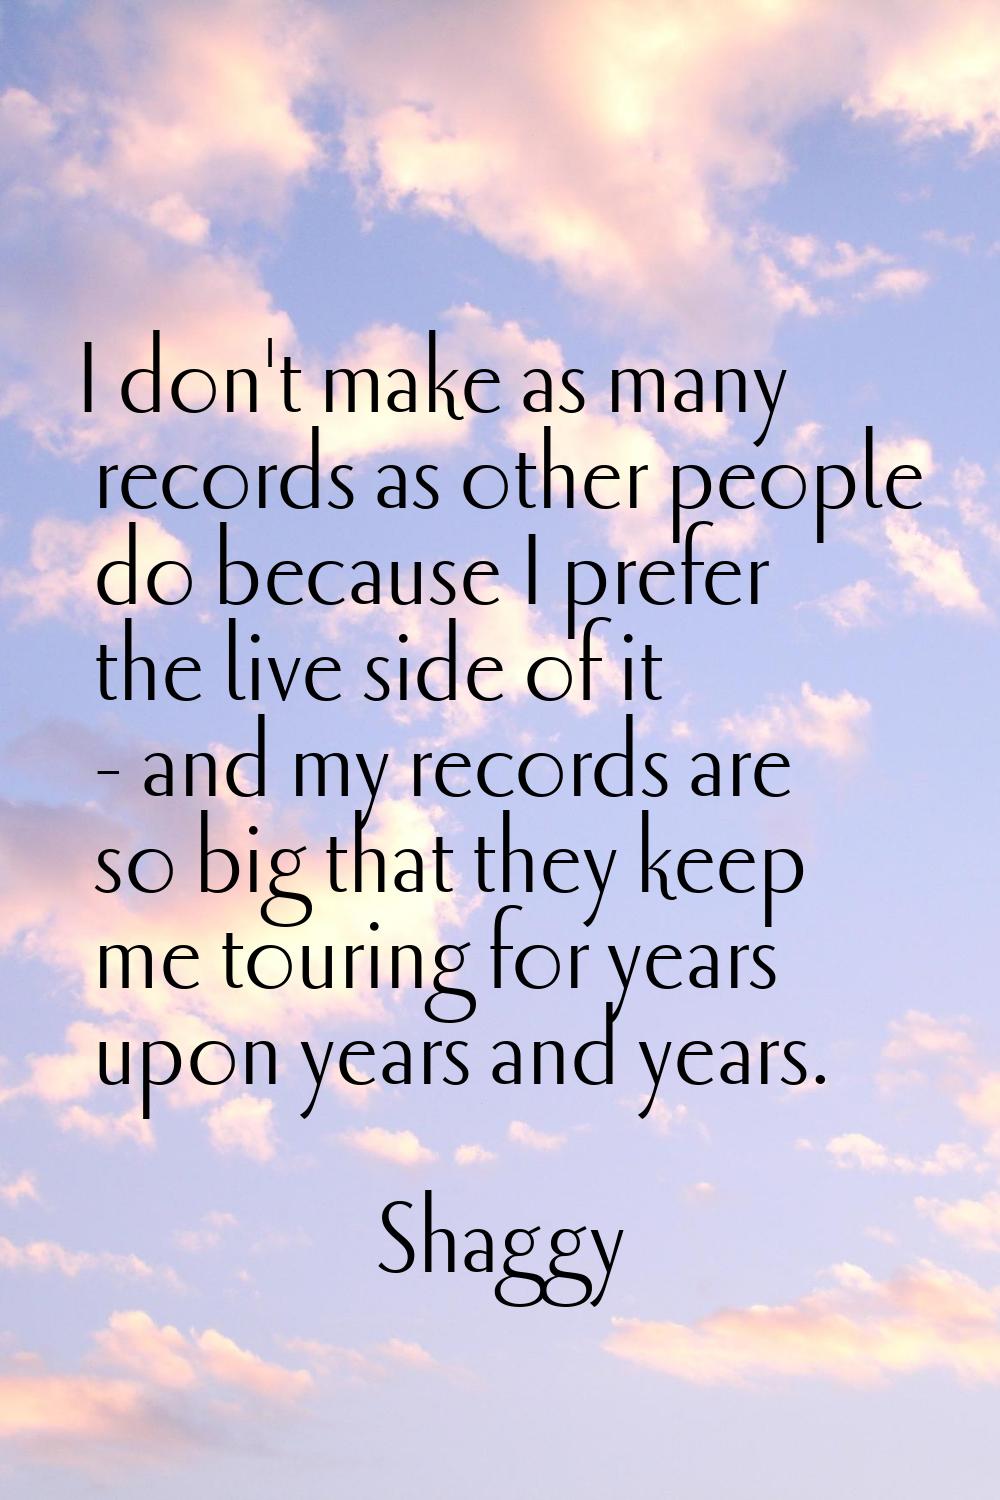 I don't make as many records as other people do because I prefer the live side of it - and my recor